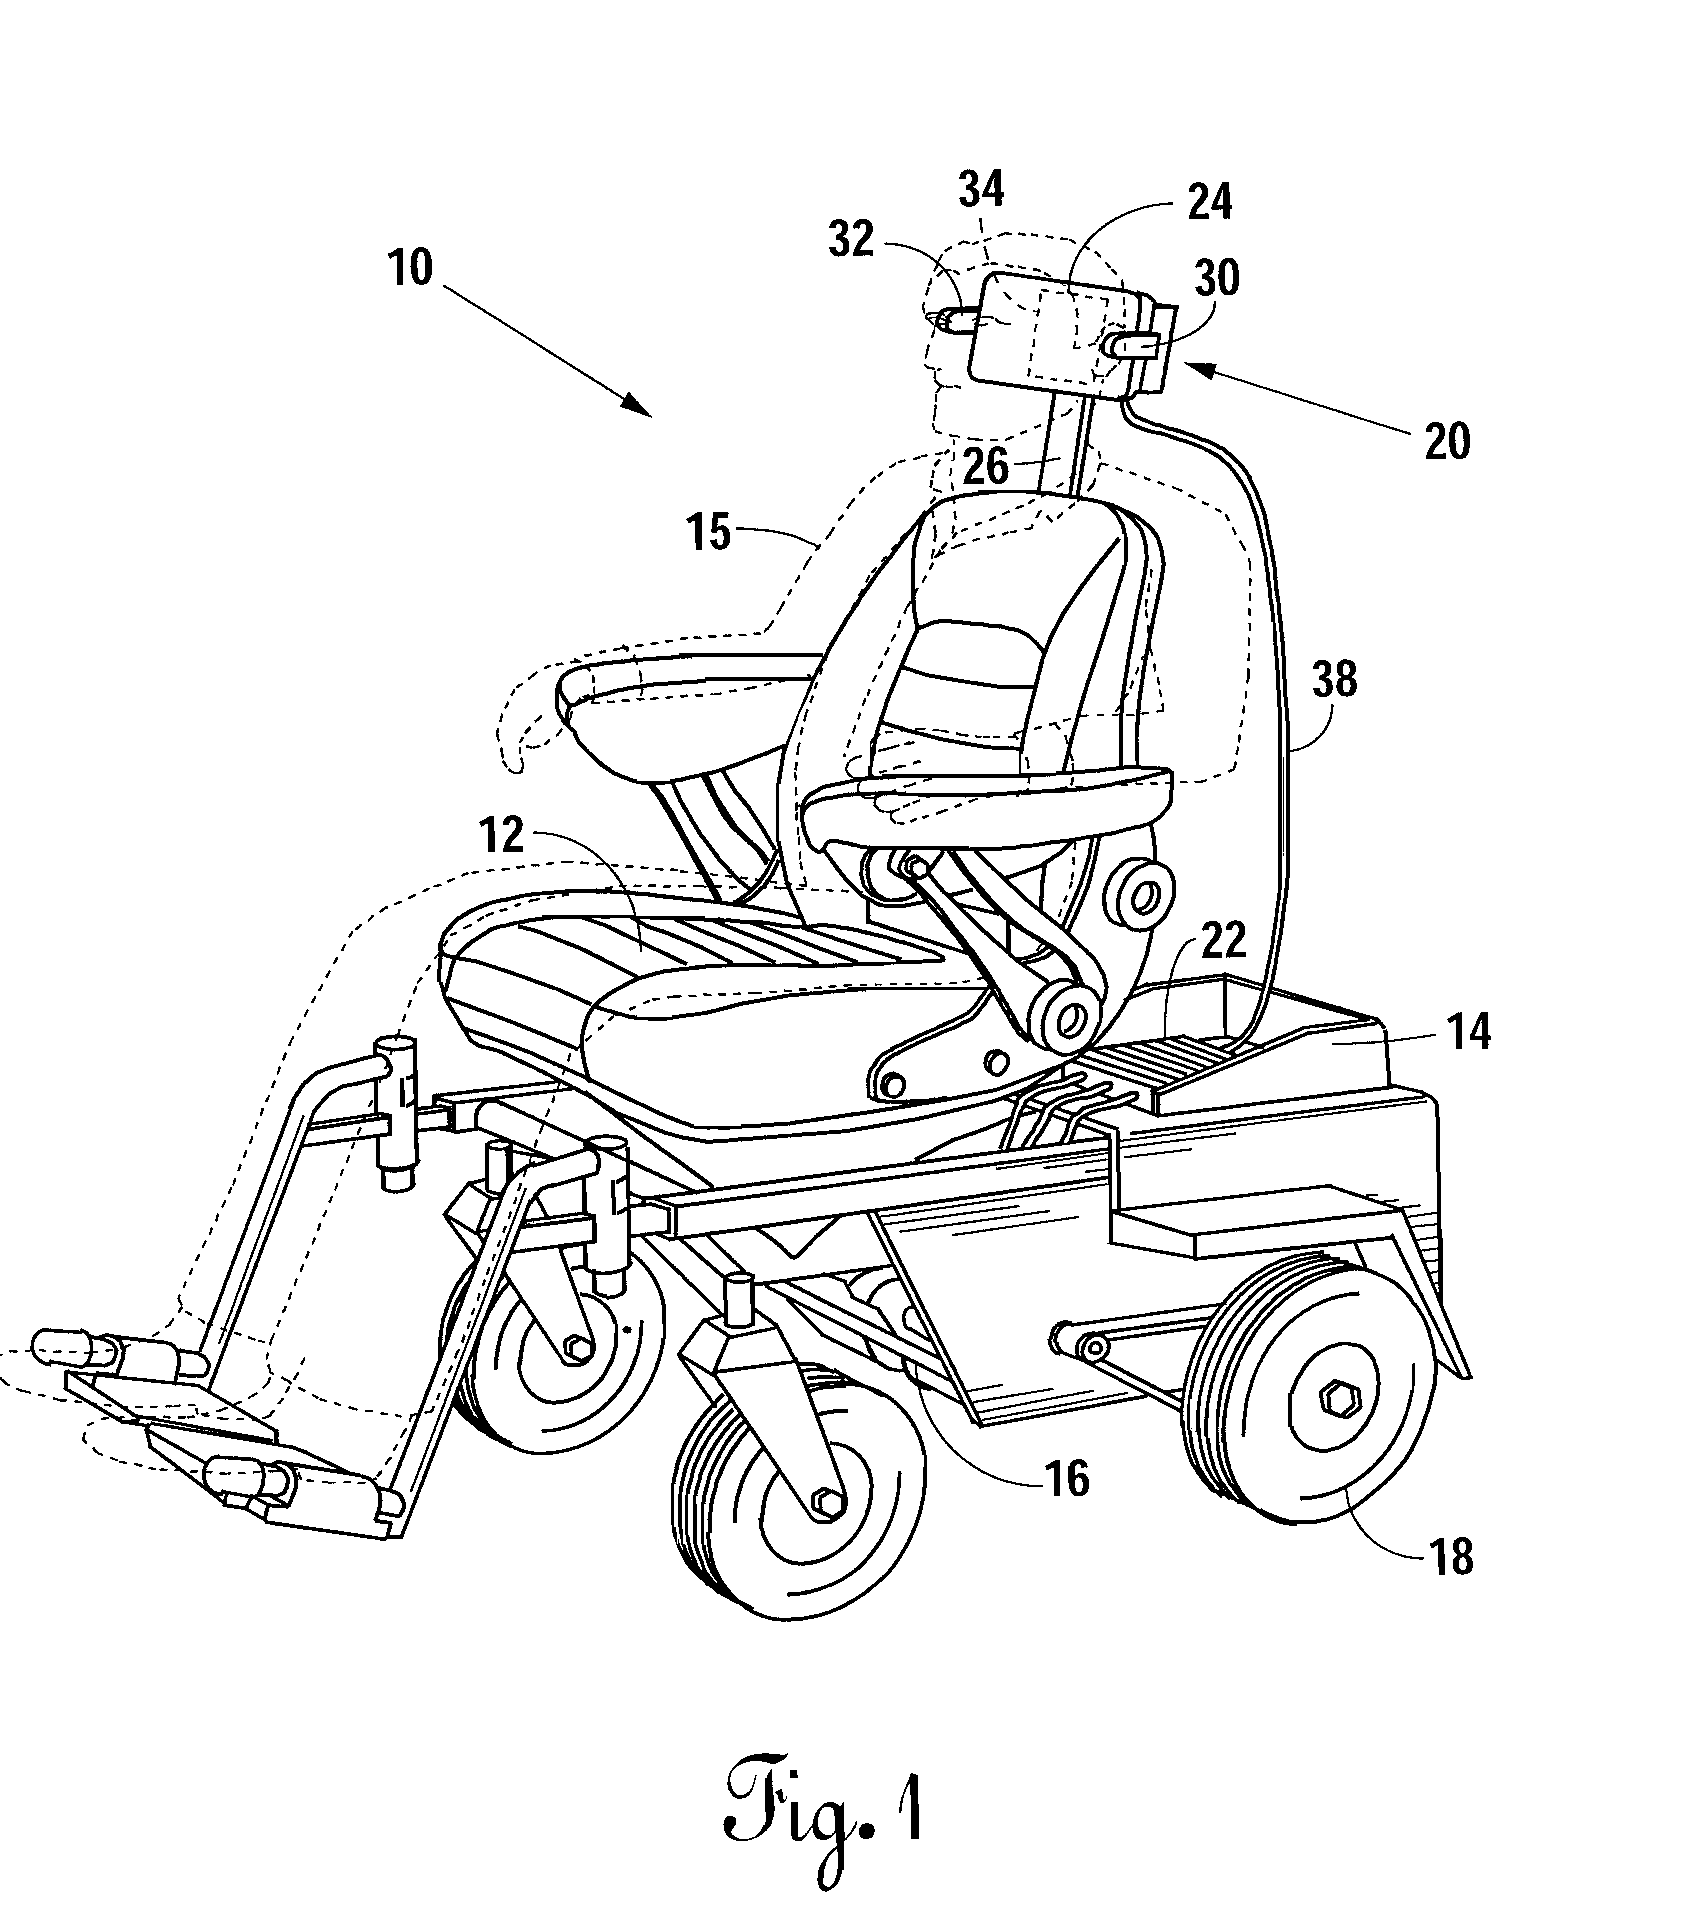 Method and apparatus for electronically controlling a motorized device